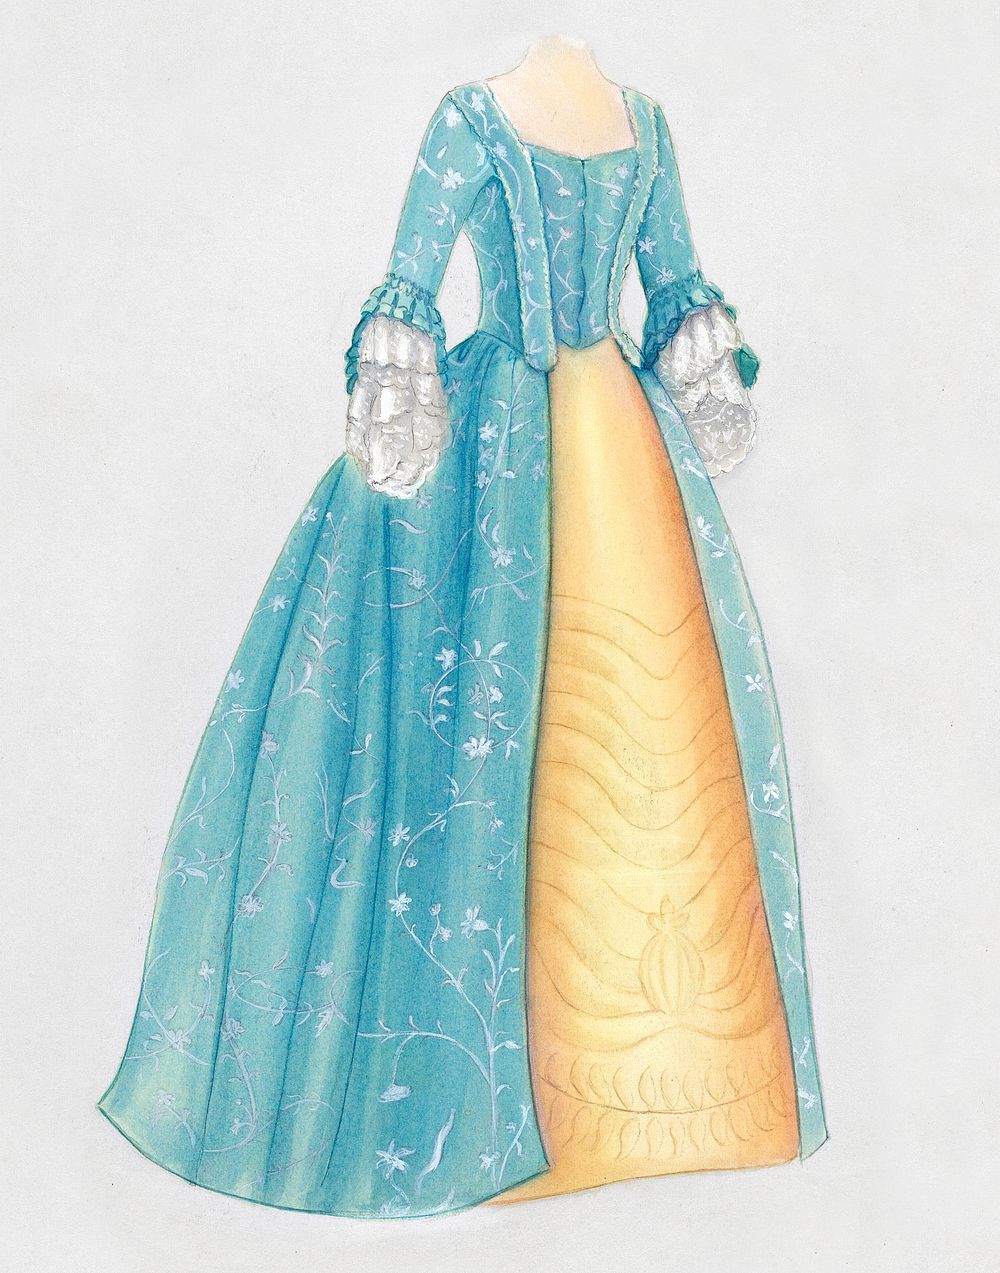 Dress (c. 1936) by Jean Peszel. Original from The National Gallery of Art. Digitally enhanced by rawpixel.